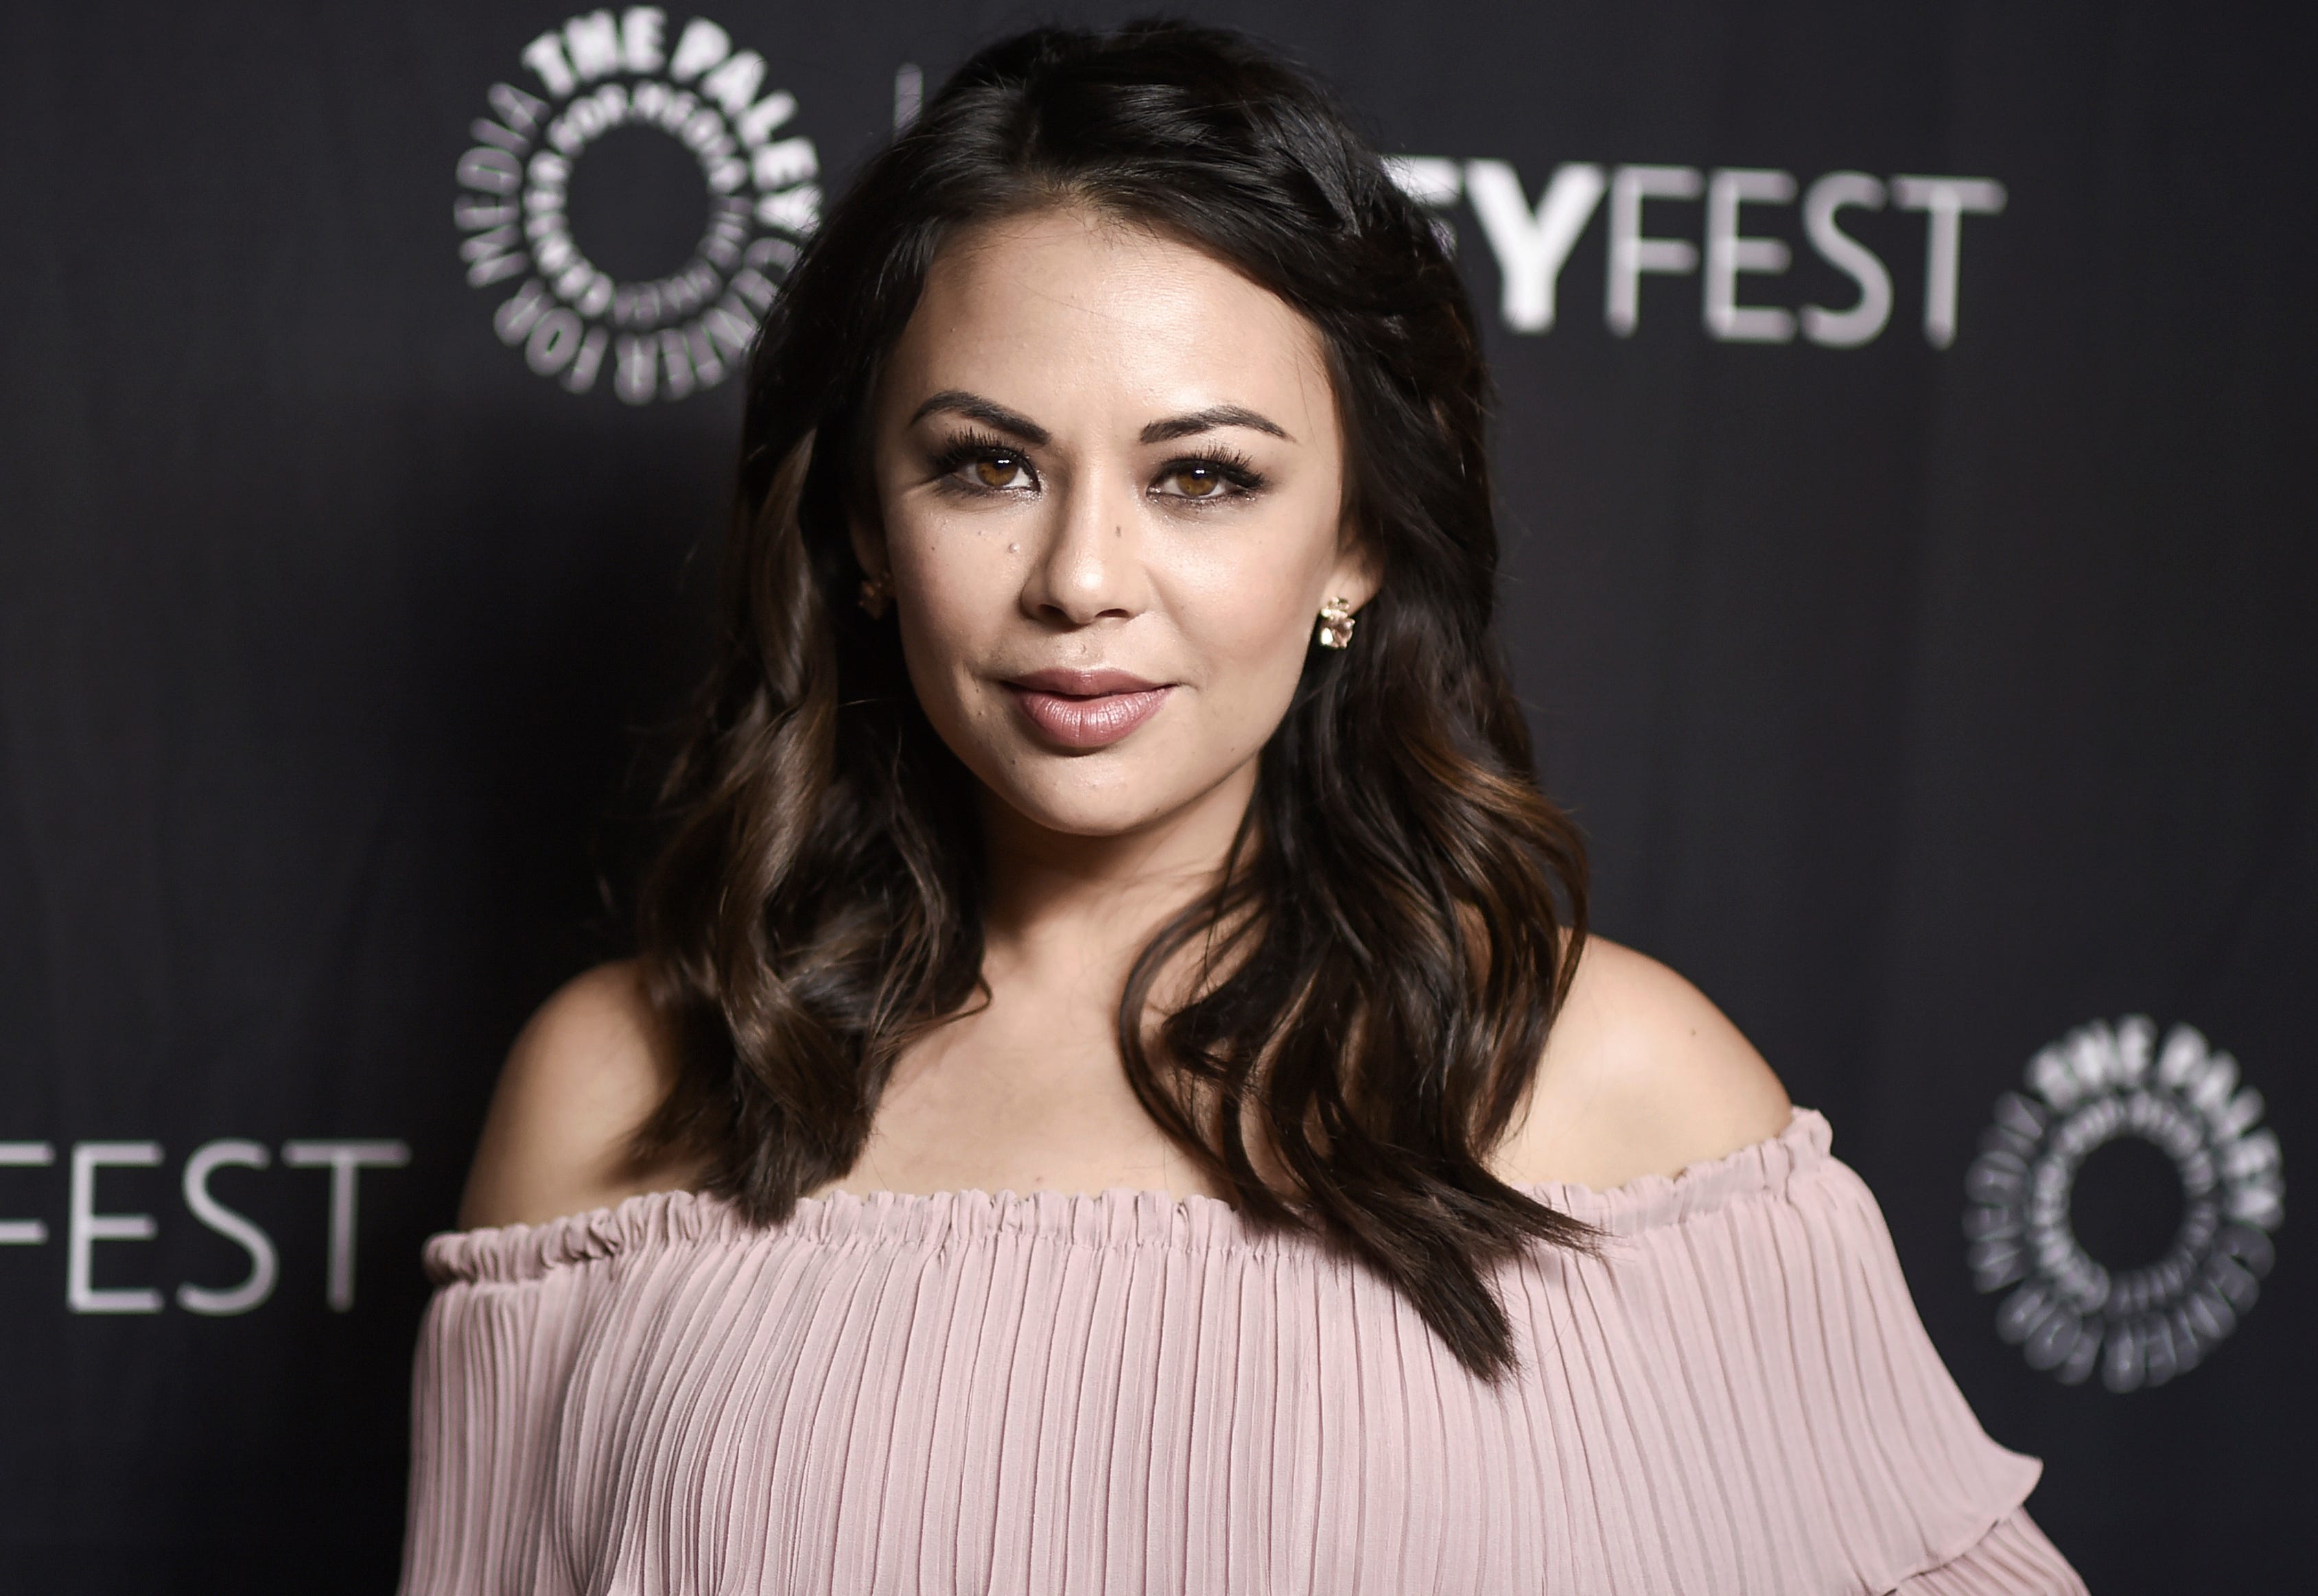 Janel Parrish Books Role In 'The Ray'. 